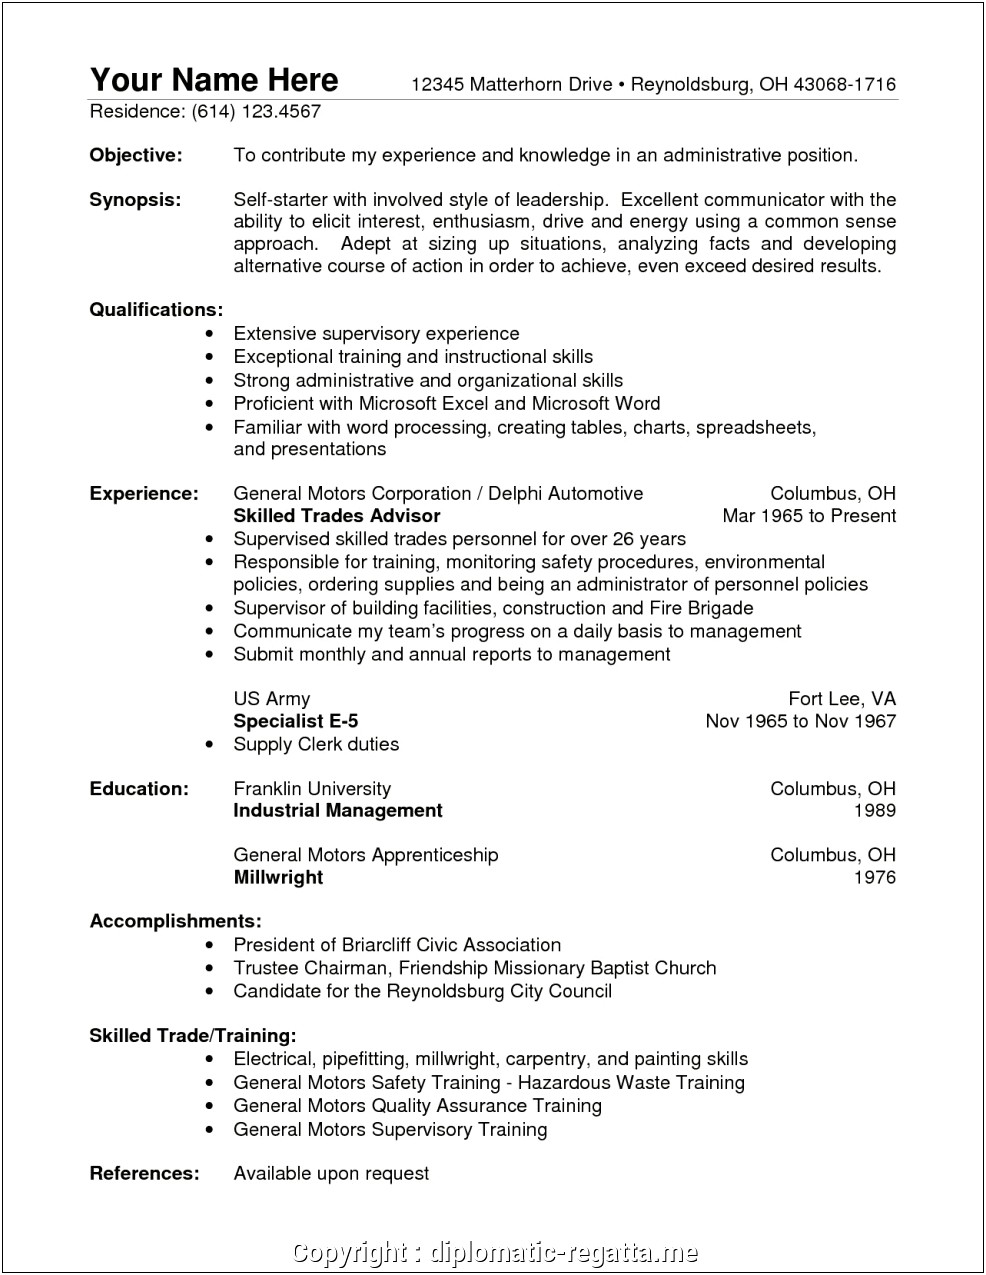 Resume Objective For Warehouse Position